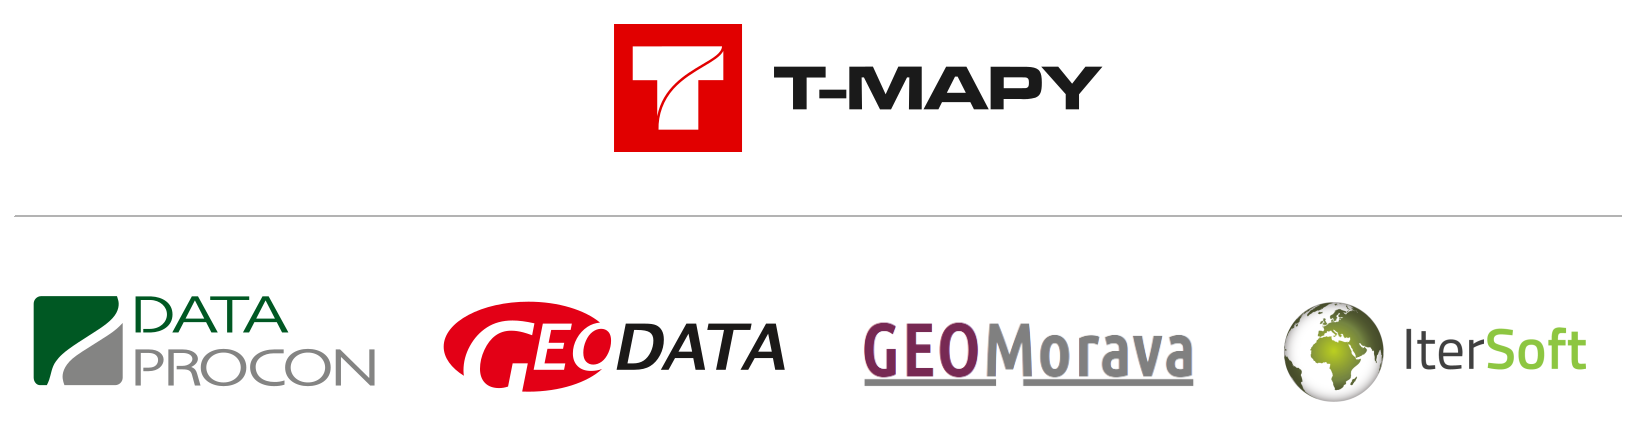 T-MAPY Partners